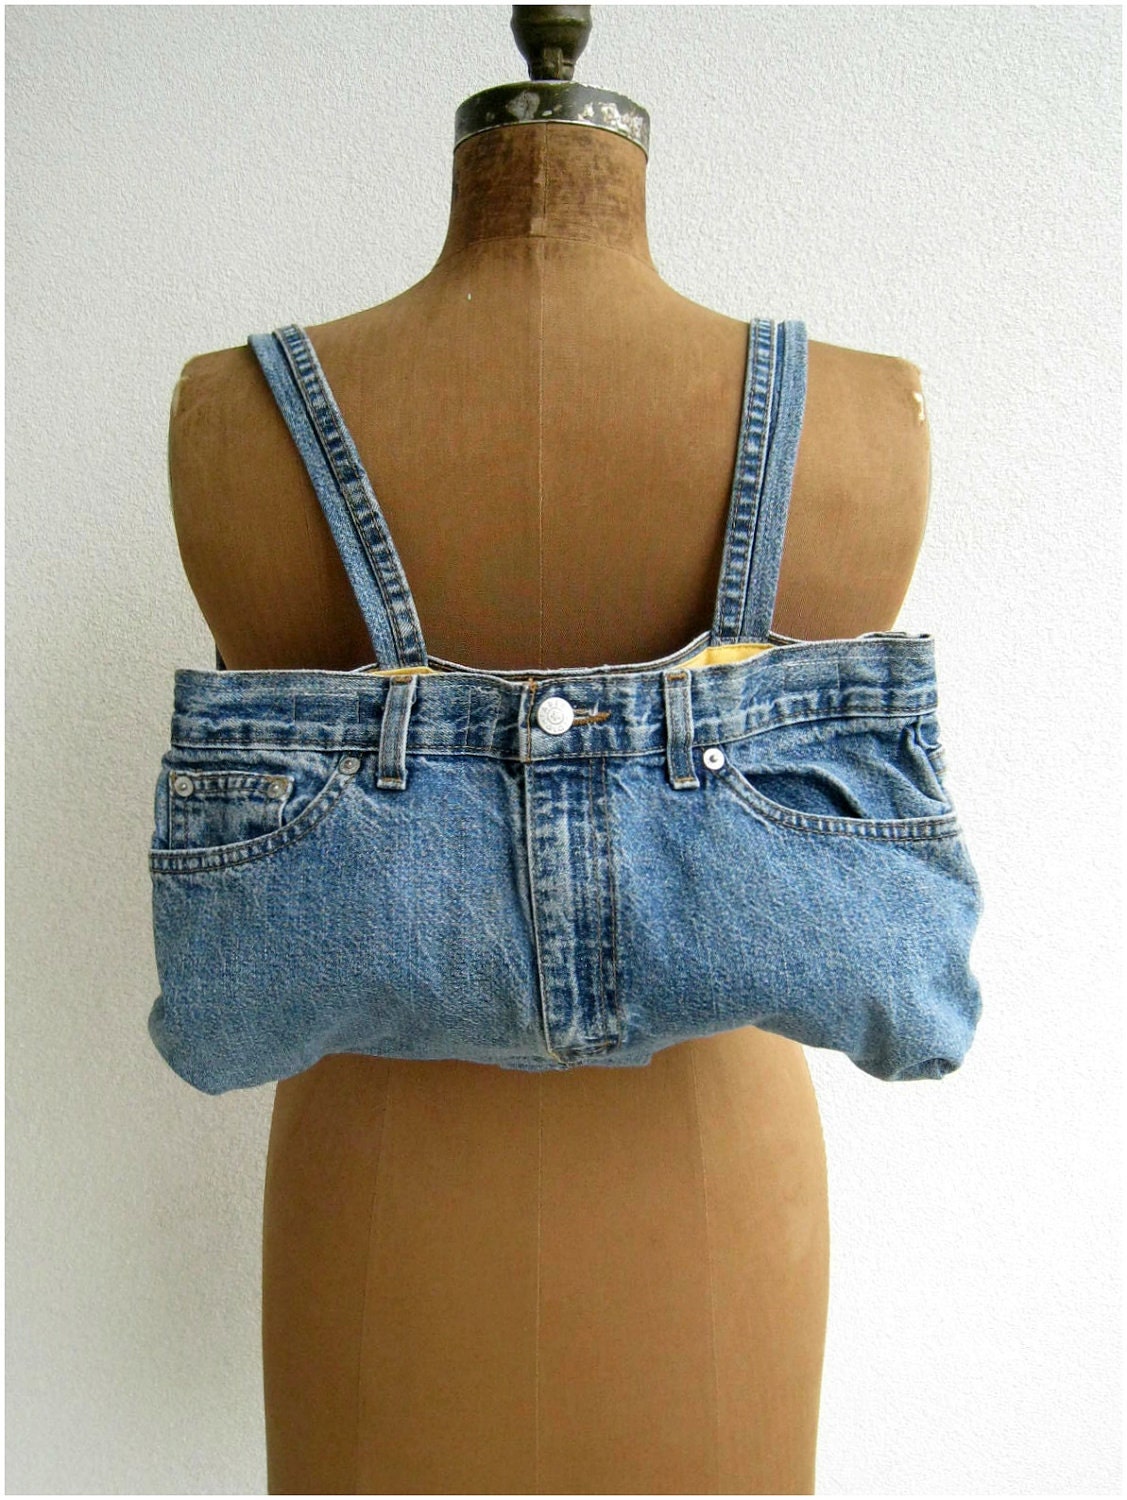 Upcycled Denim Jeans Backpack / Purse / Blue Jeans / Velcro Closure / Women / Girls / Teens / by ohzie